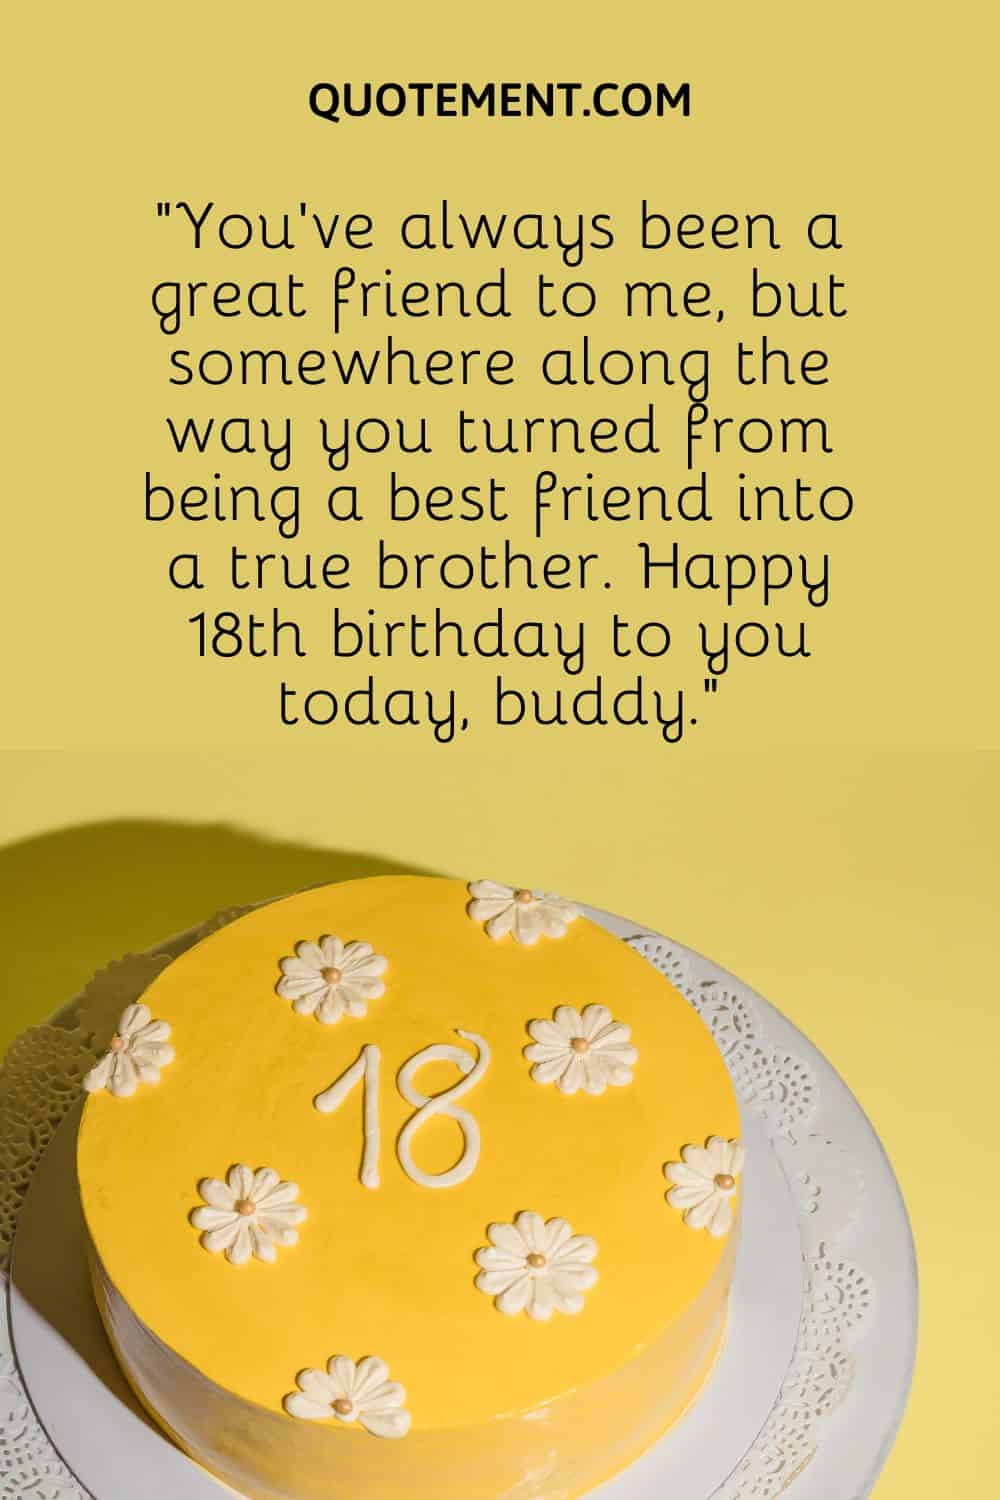 You’ve always been a great friend to me, but somewhere along the way you turned from being a best friend into a true brother